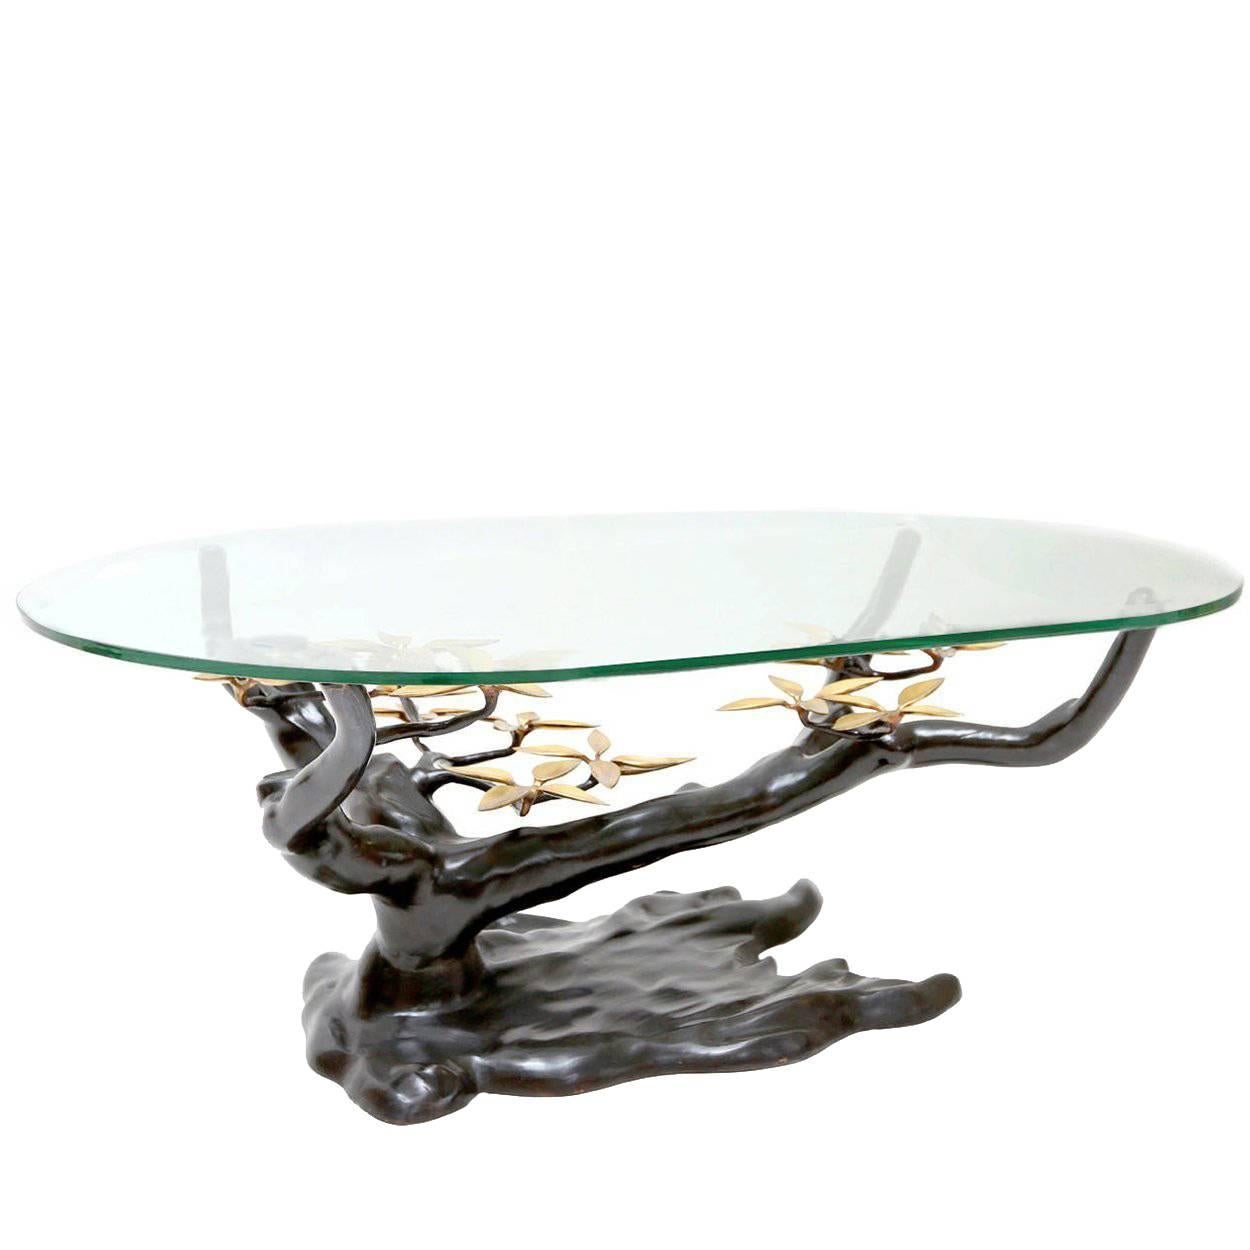 Stunning brass and black coffee table. Organic shaped. Brass is in very good and clean condition, top is also in very good condition. 

This coffee table is positioned as a sculpture in a living room or reading corner.

Condition : this product is